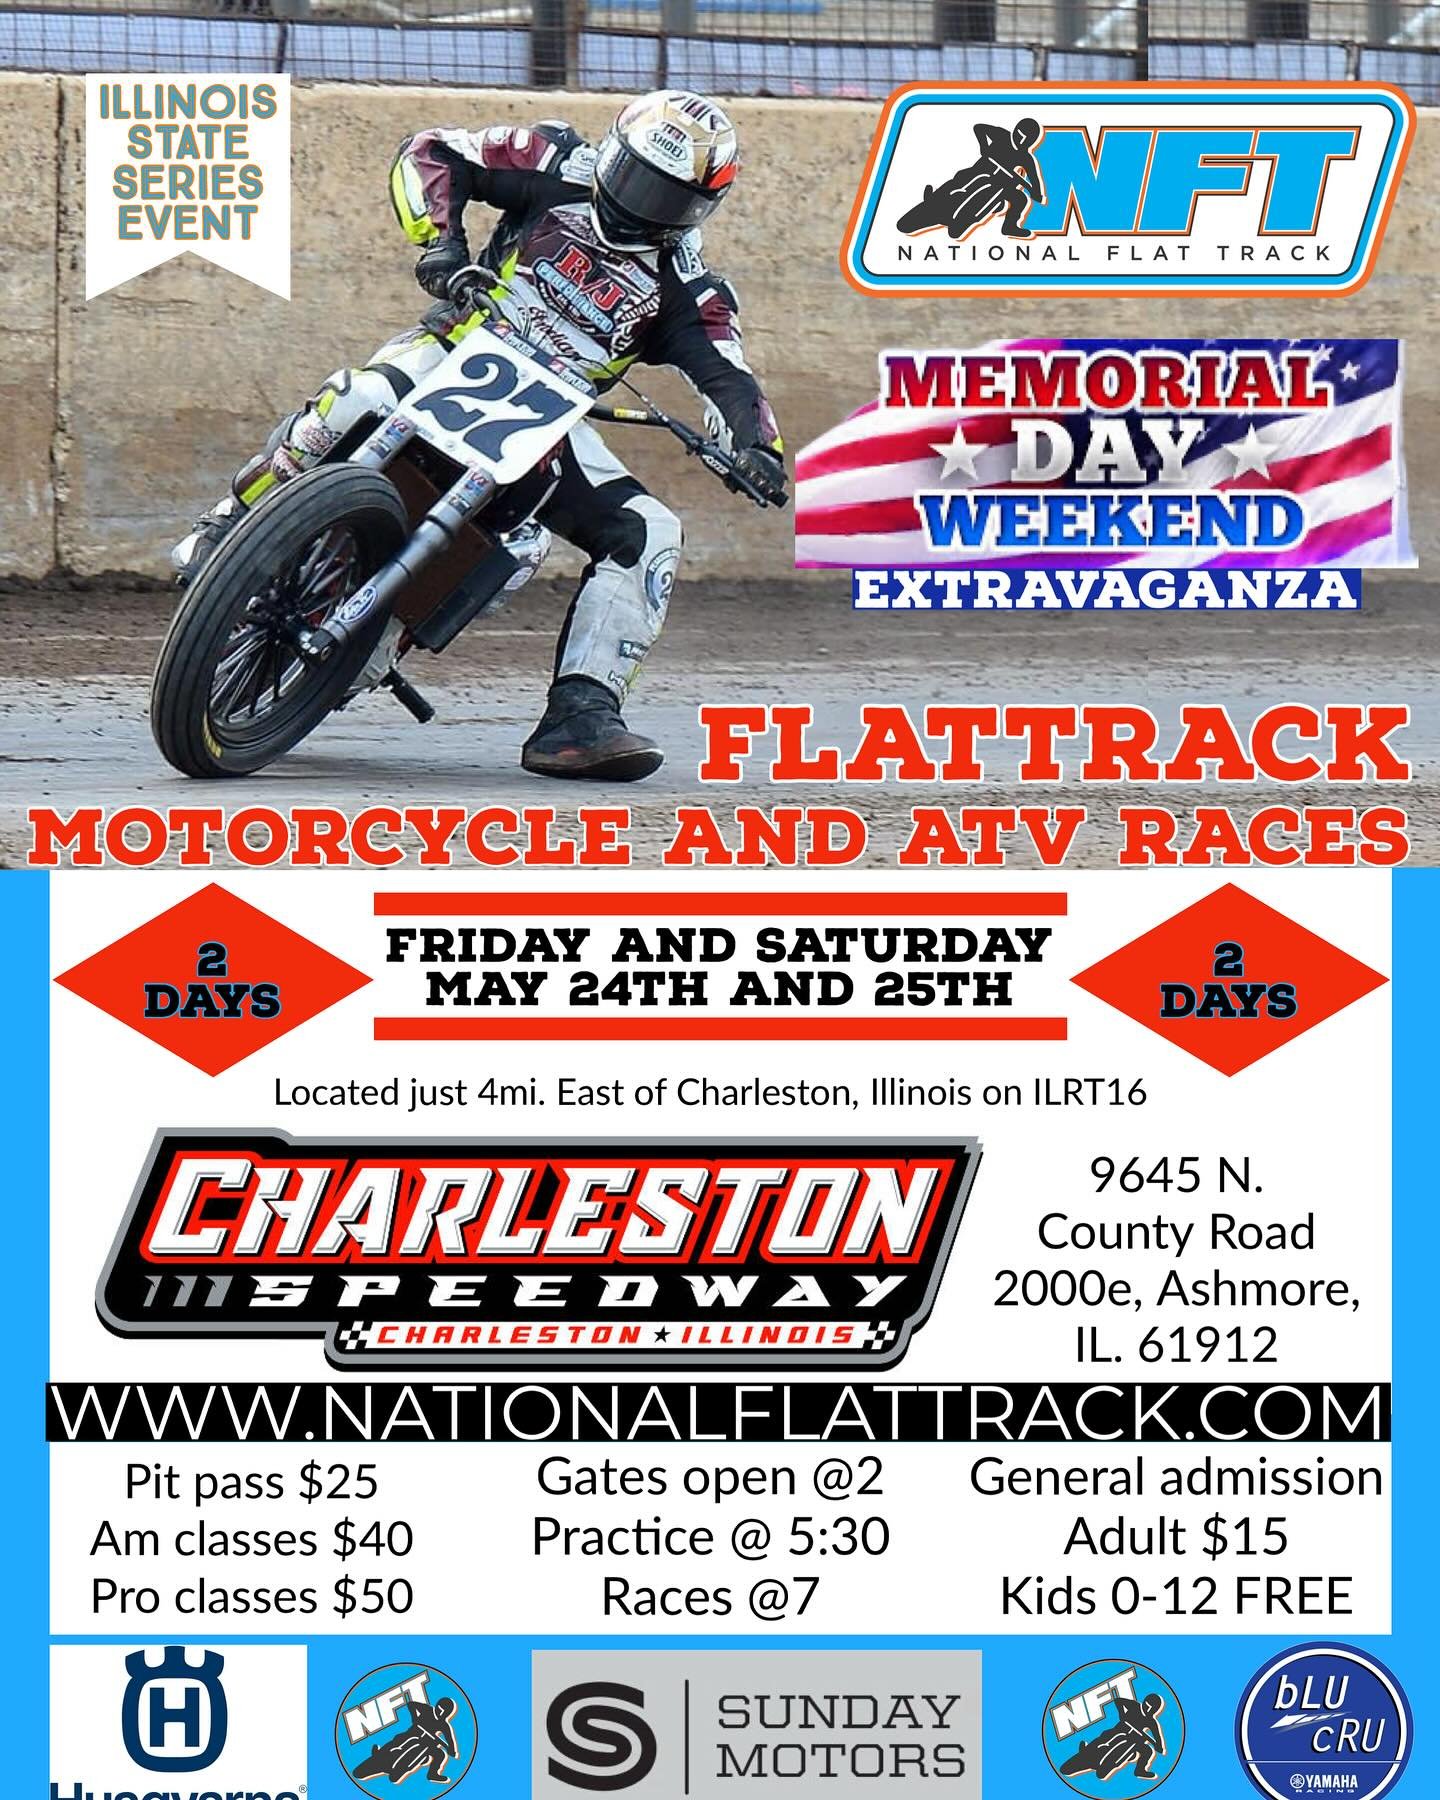 Part of the National Flattrack Illinois State Series- the Memorial Day Extravaganza at the Charleston Speedway!
2 days of Motorcycle and ATV racing May 24th and 25th. Some big news coming up, you don&rsquo;t wanna miss it!#nationalflattrack #national